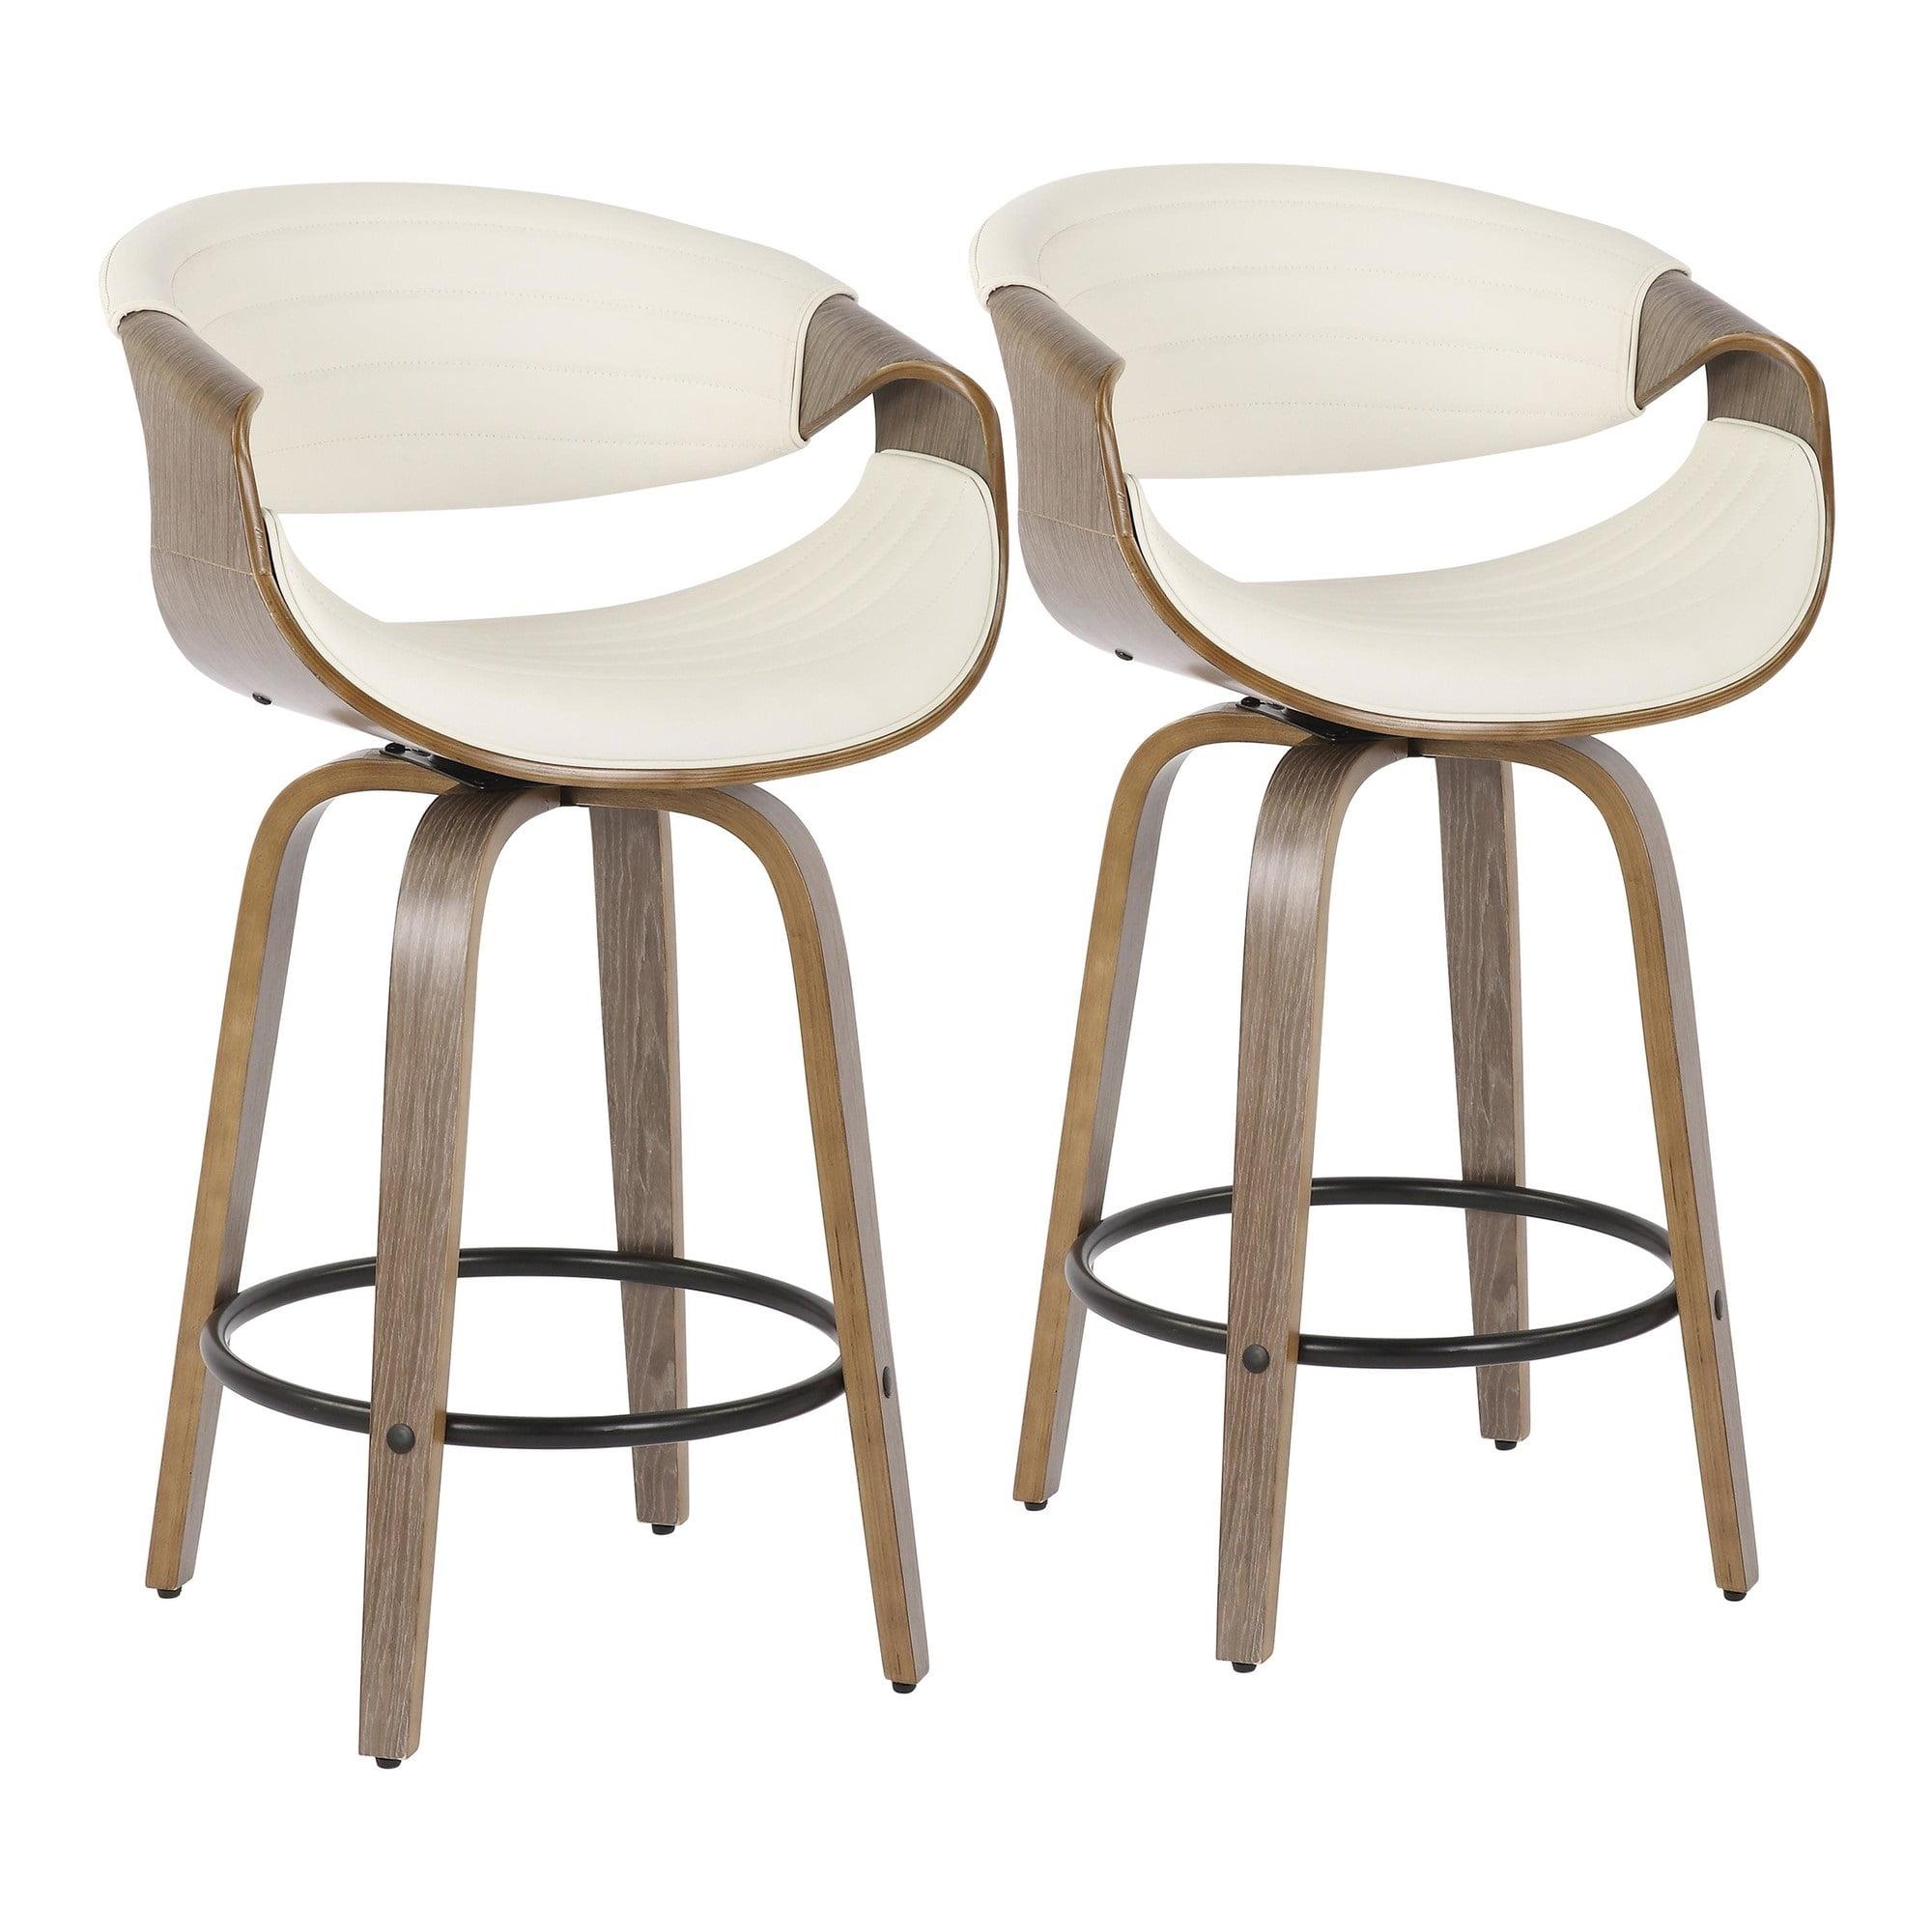 Symphony Mid-Century Modern Swivel Counter Stool in White and Light Grey